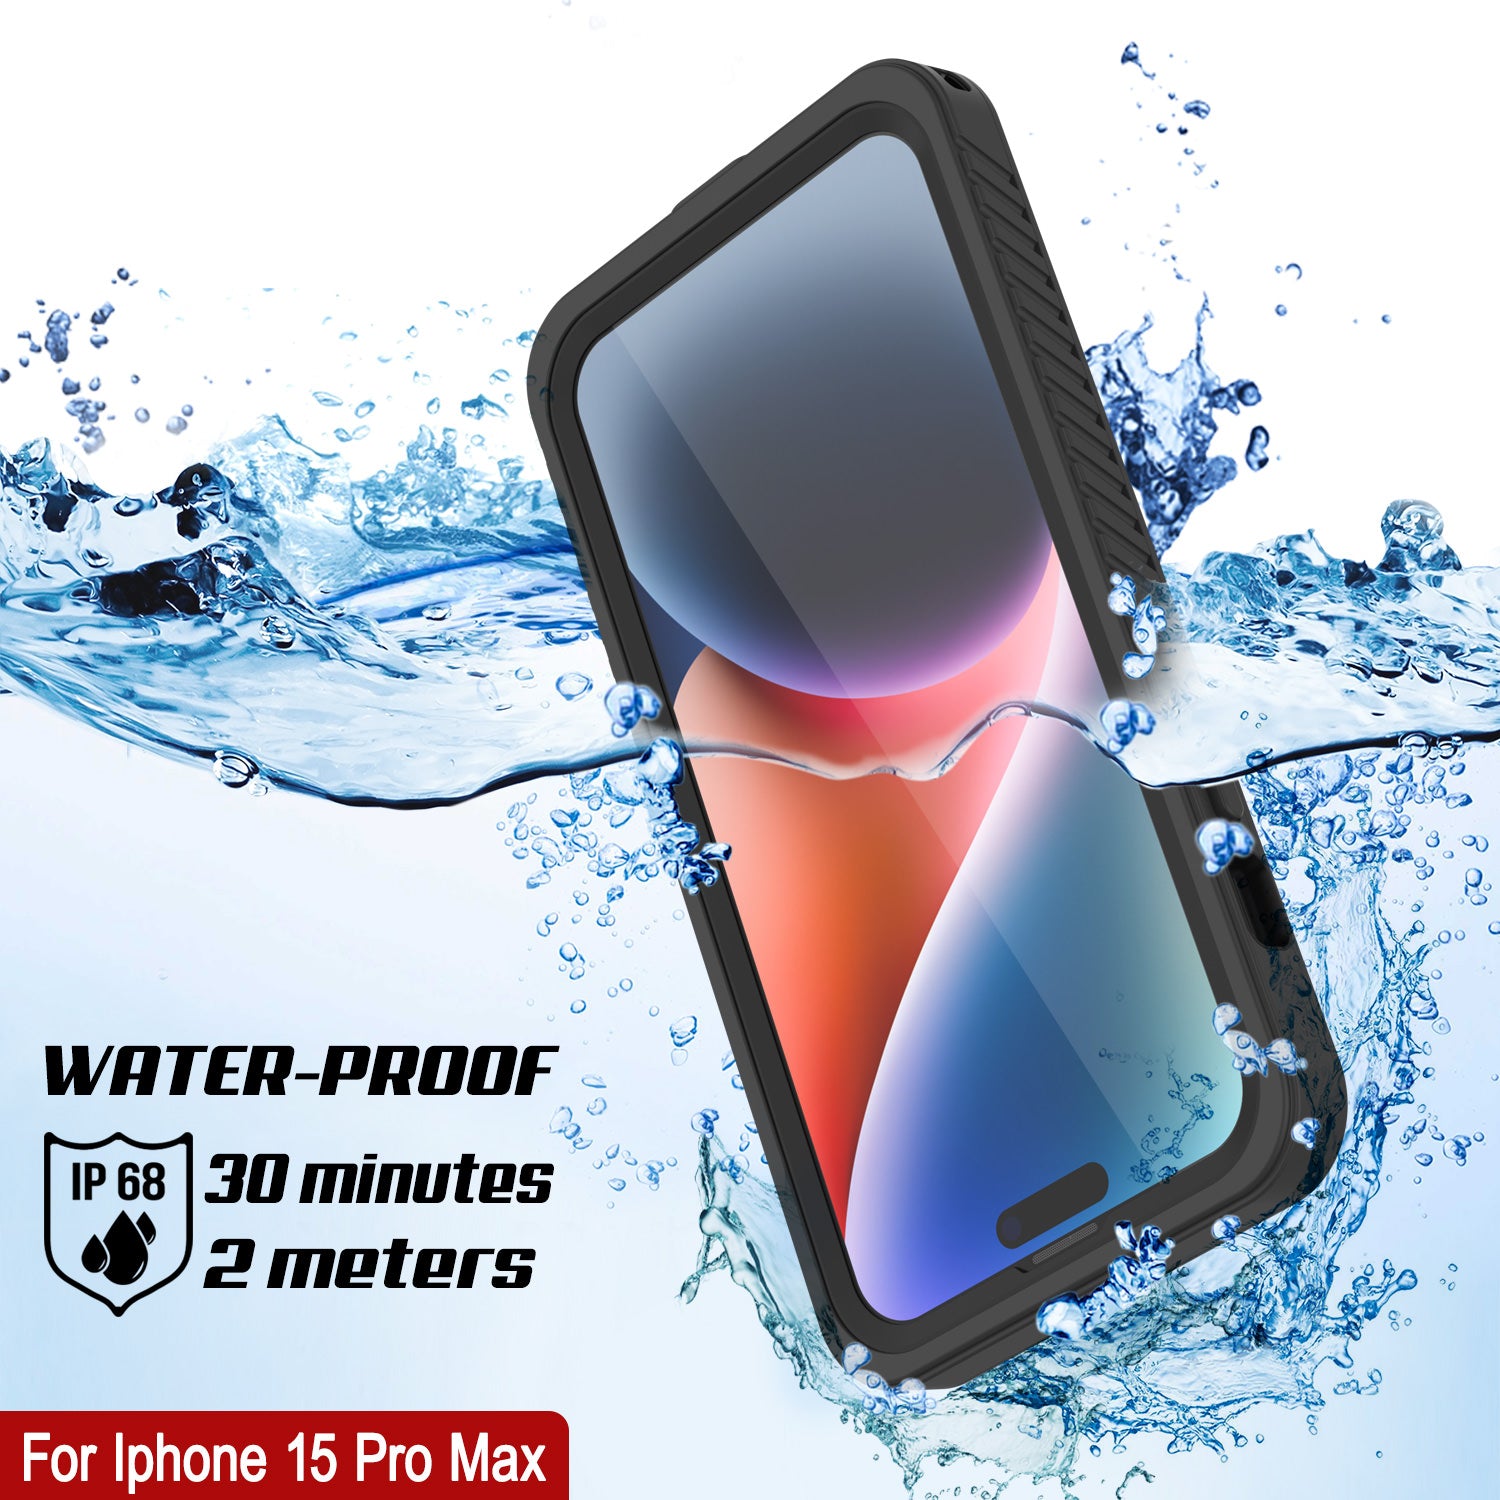 iPhone 15 Pro Max Waterproof Case, Punkcase [Extreme Series] Armor Cover w/ Built in Screen Protector [Black]